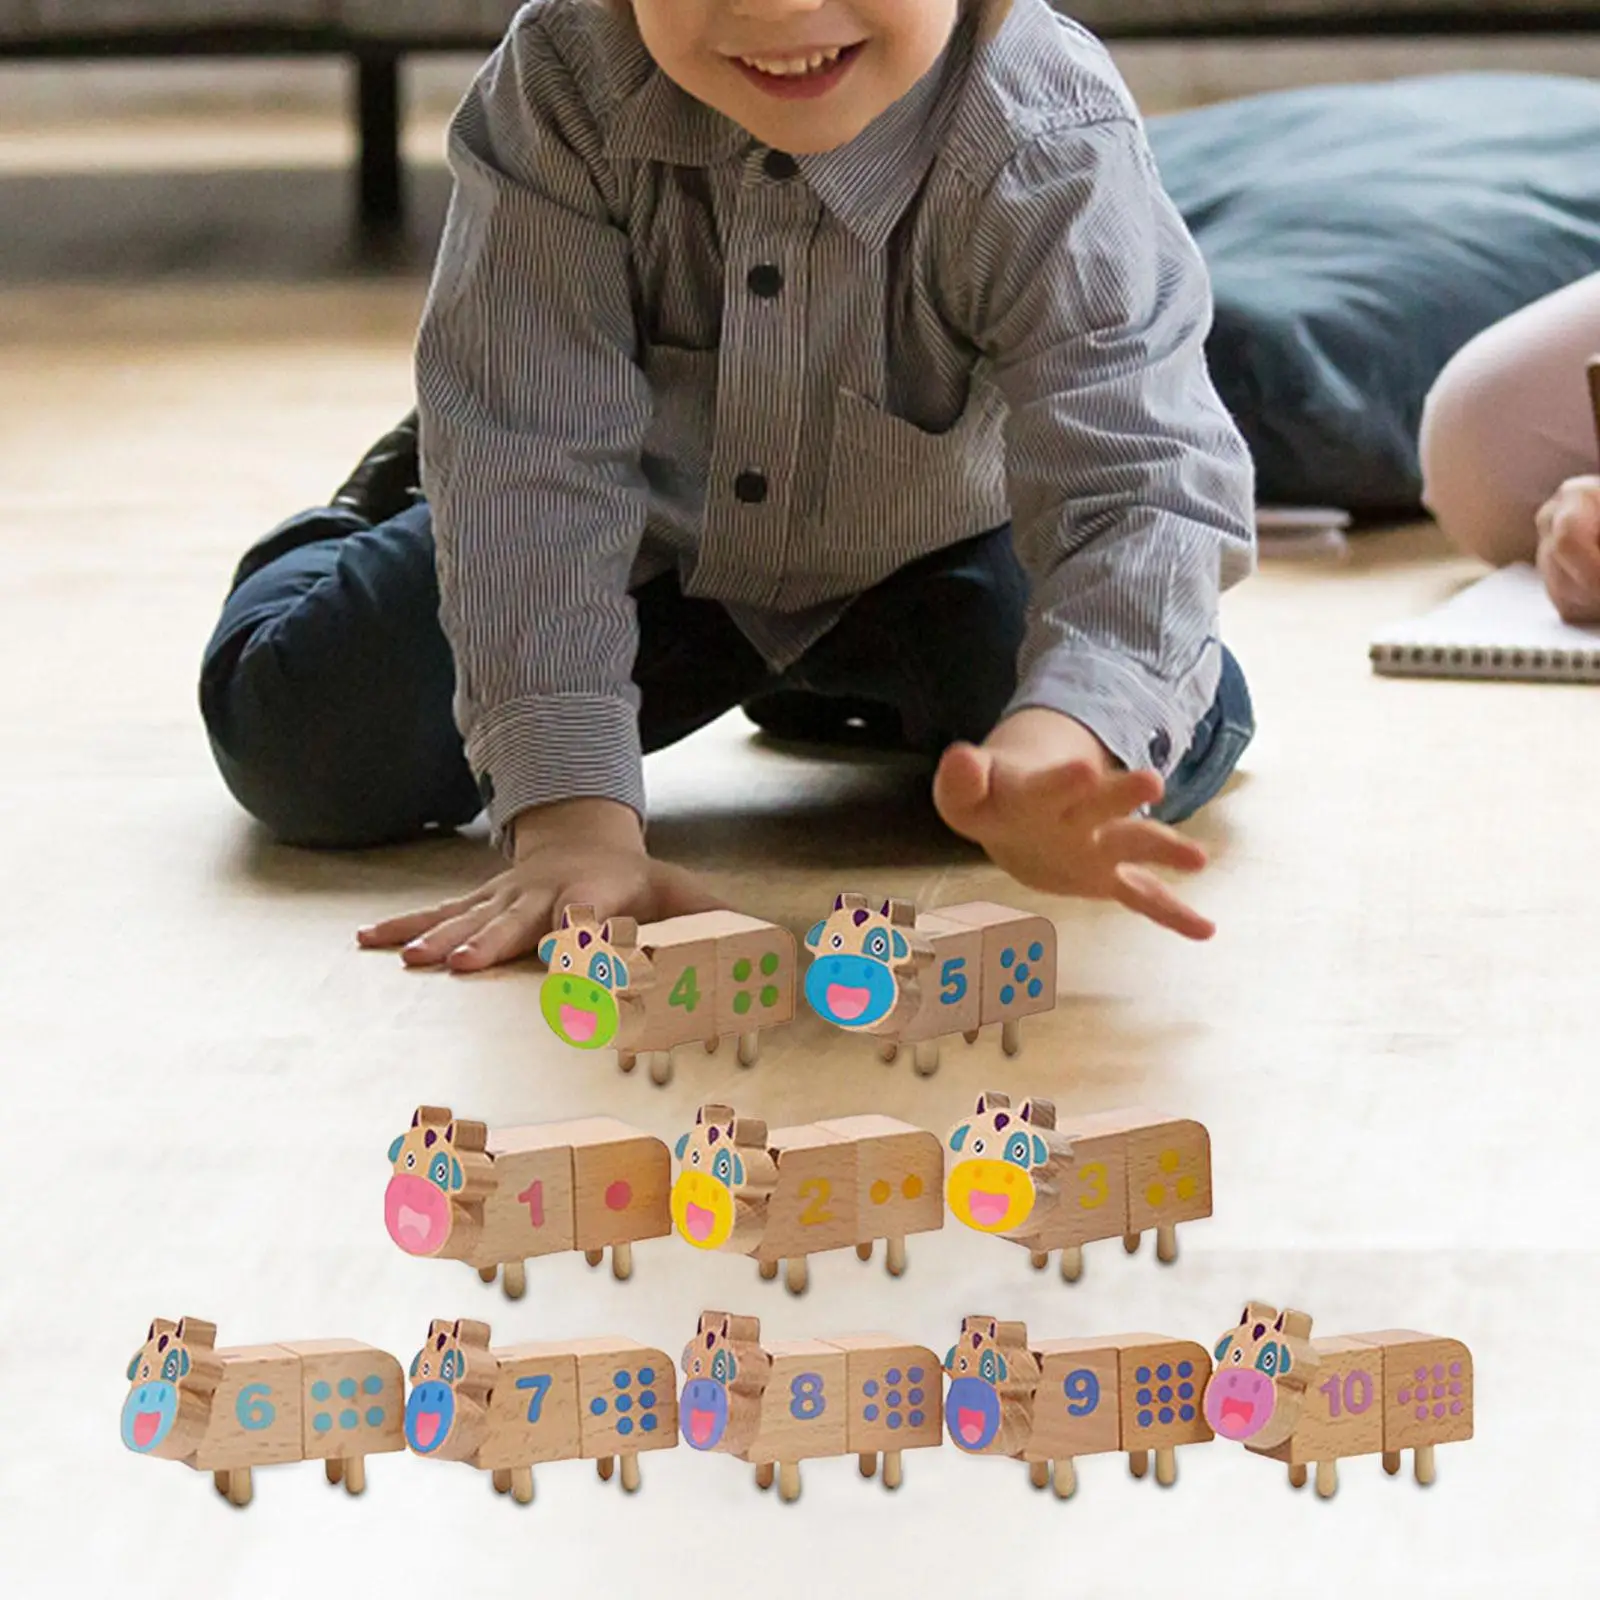 10 Pieces Wooden Building Blocks for Toddlers Early Learning Alphabet Number Stacking Blocks for Boys Girls Kids Birthday Gifts